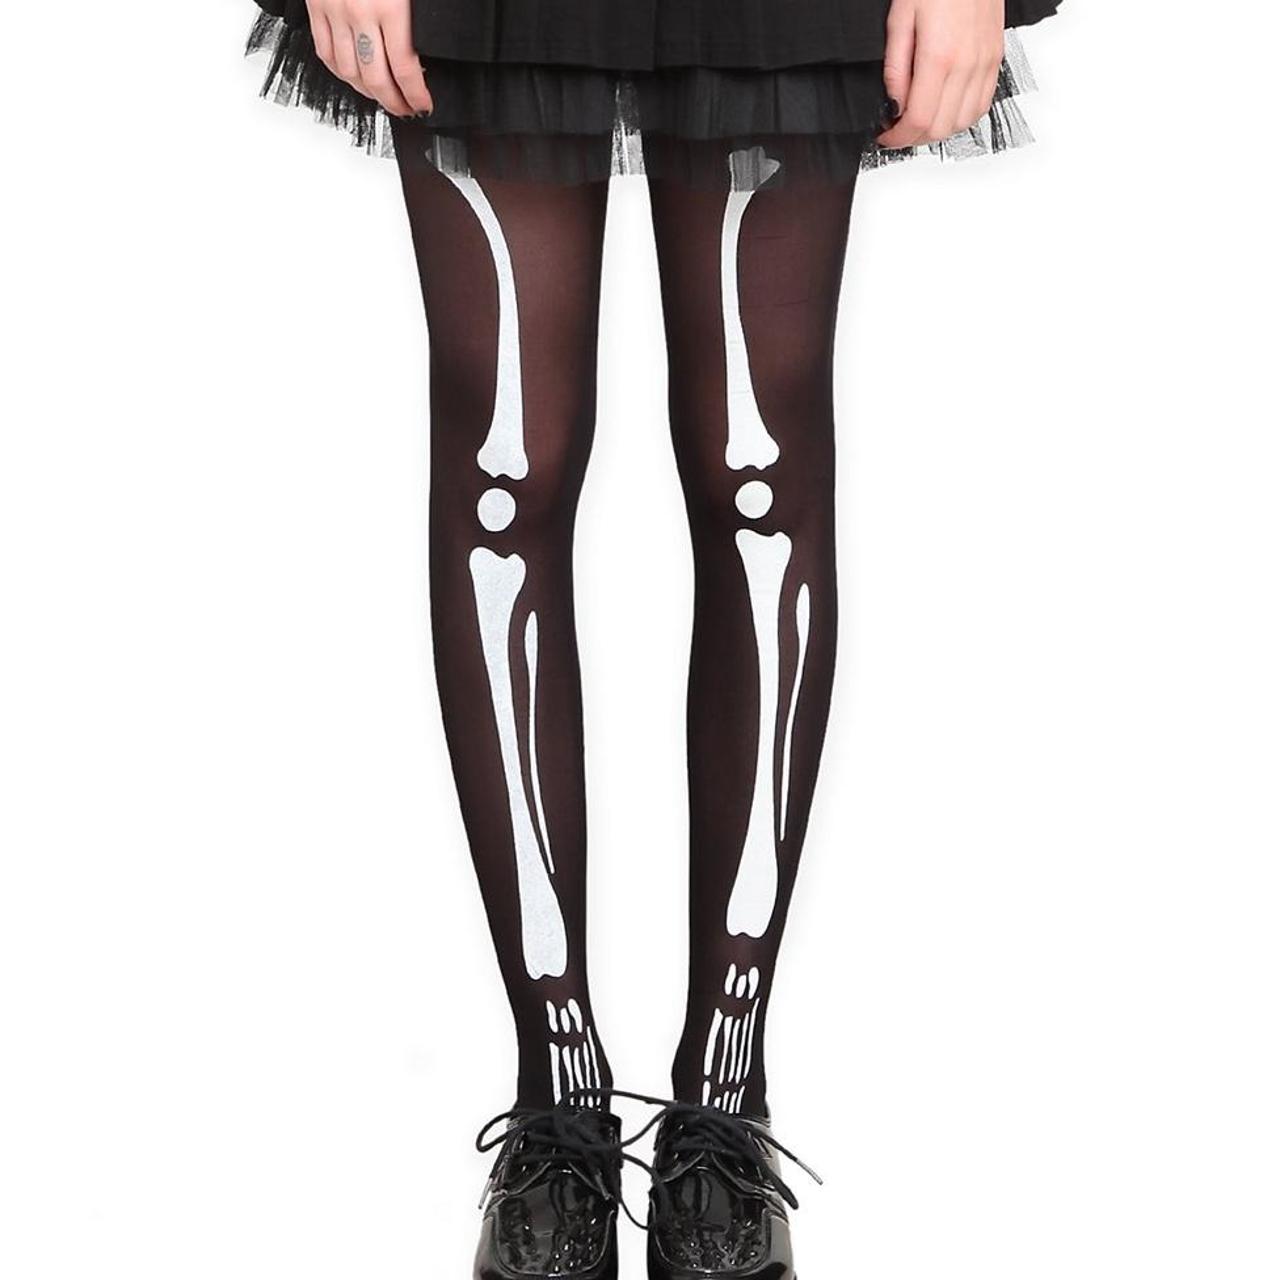 Hot Topic Women's Black and White Hosiery-tights